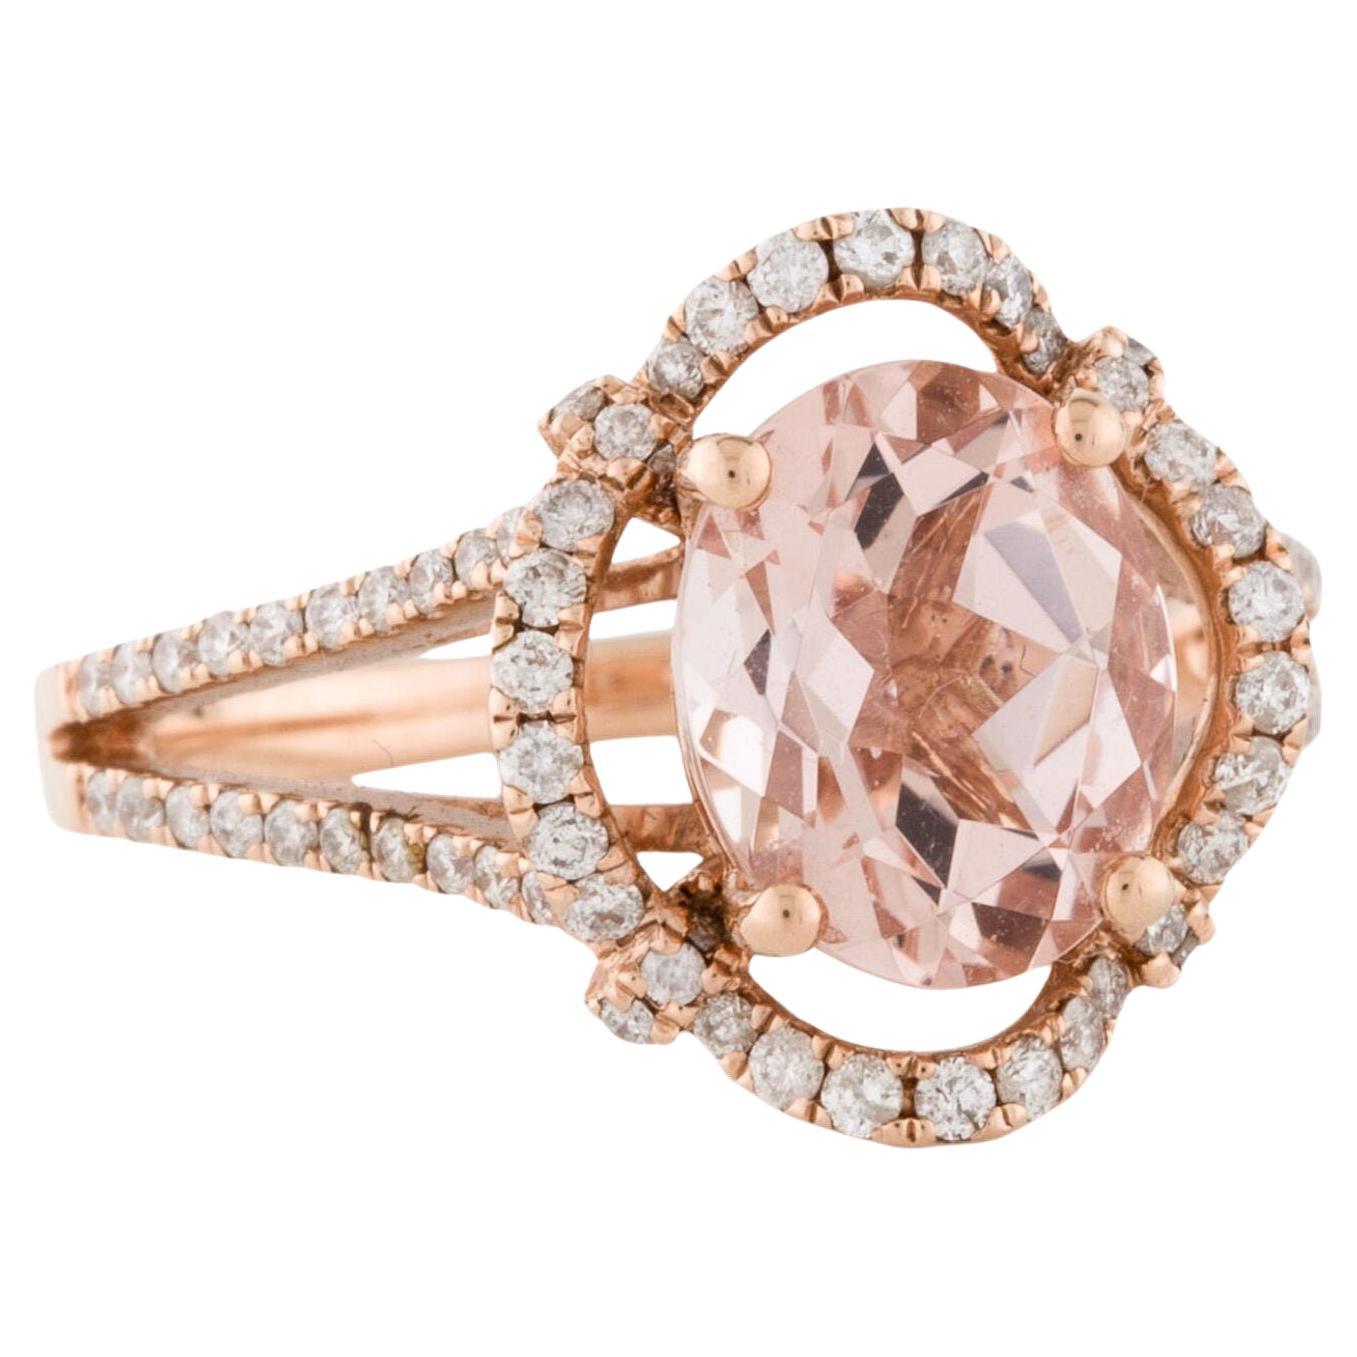 This is an alluring natural morganite and diamond ring set in solid 14K rose gold. The natural 2.37 Ct oval cut morganite has an excellent peachy pink color and is surrounded by a halo of round cut white diamonds. The ring is stamped 14K and is a